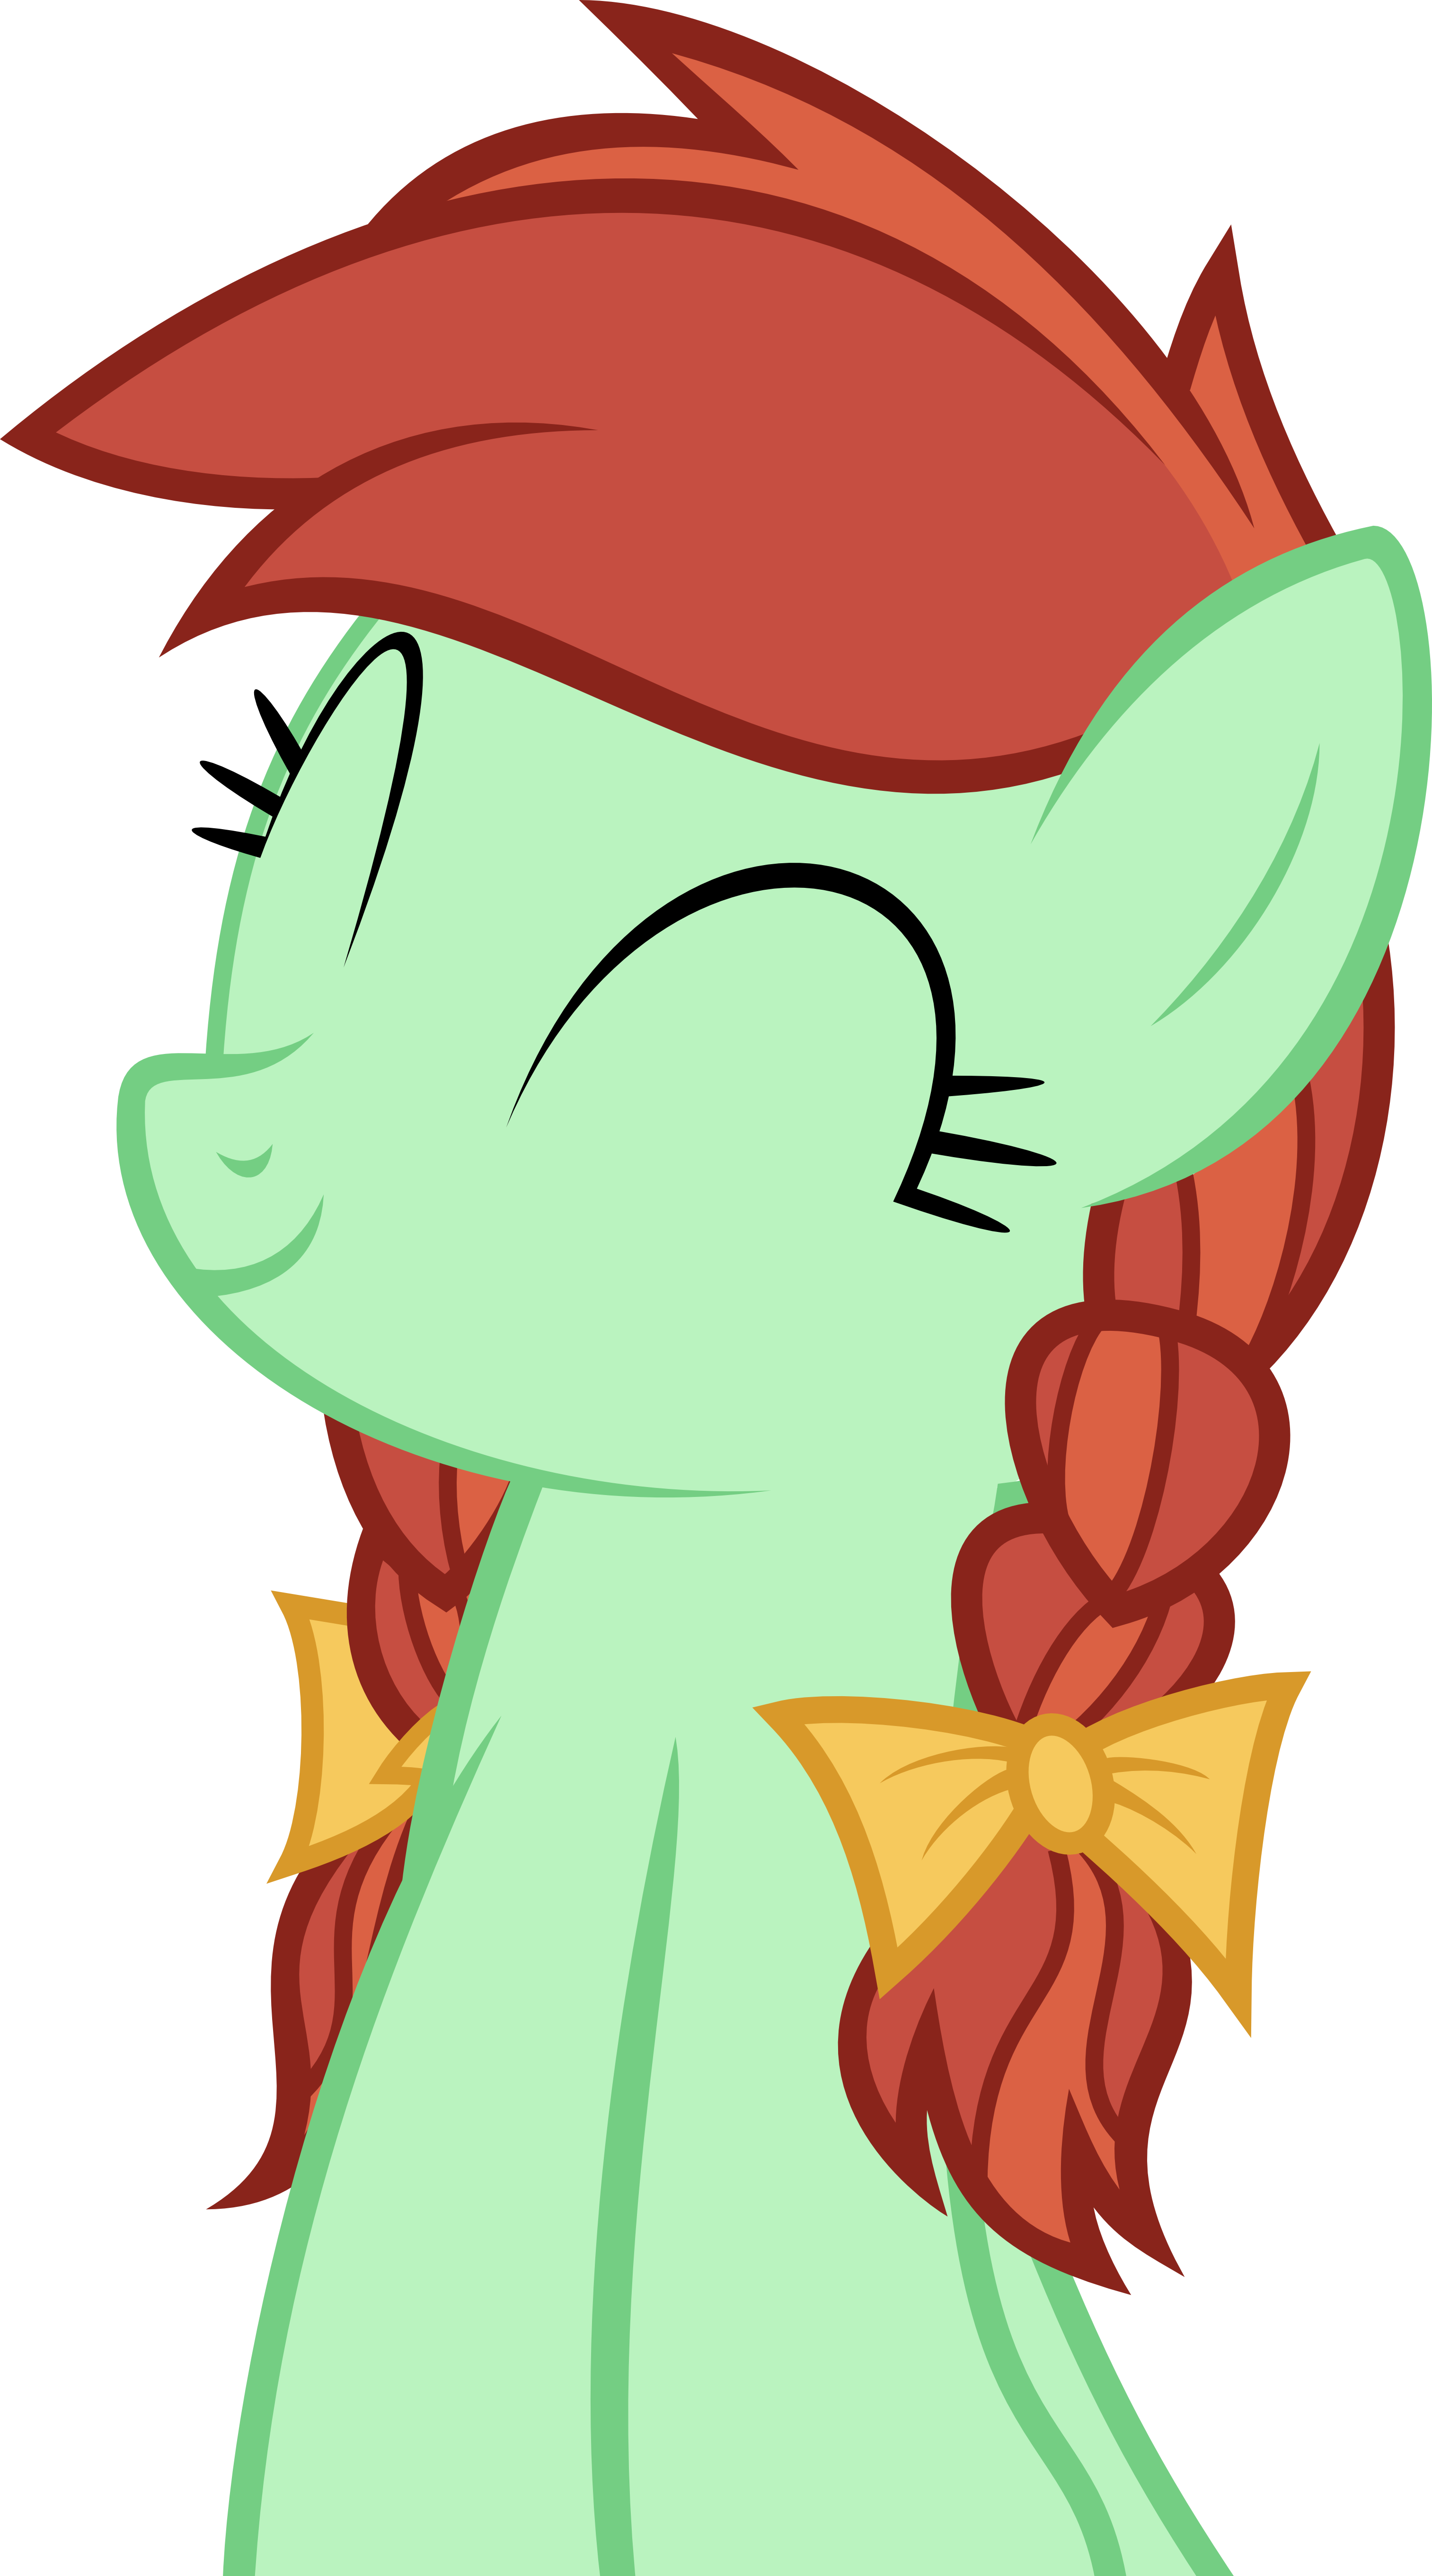 Candy Apples By Cider-crave - Mlp Candy Apples Vector (3026x5443)